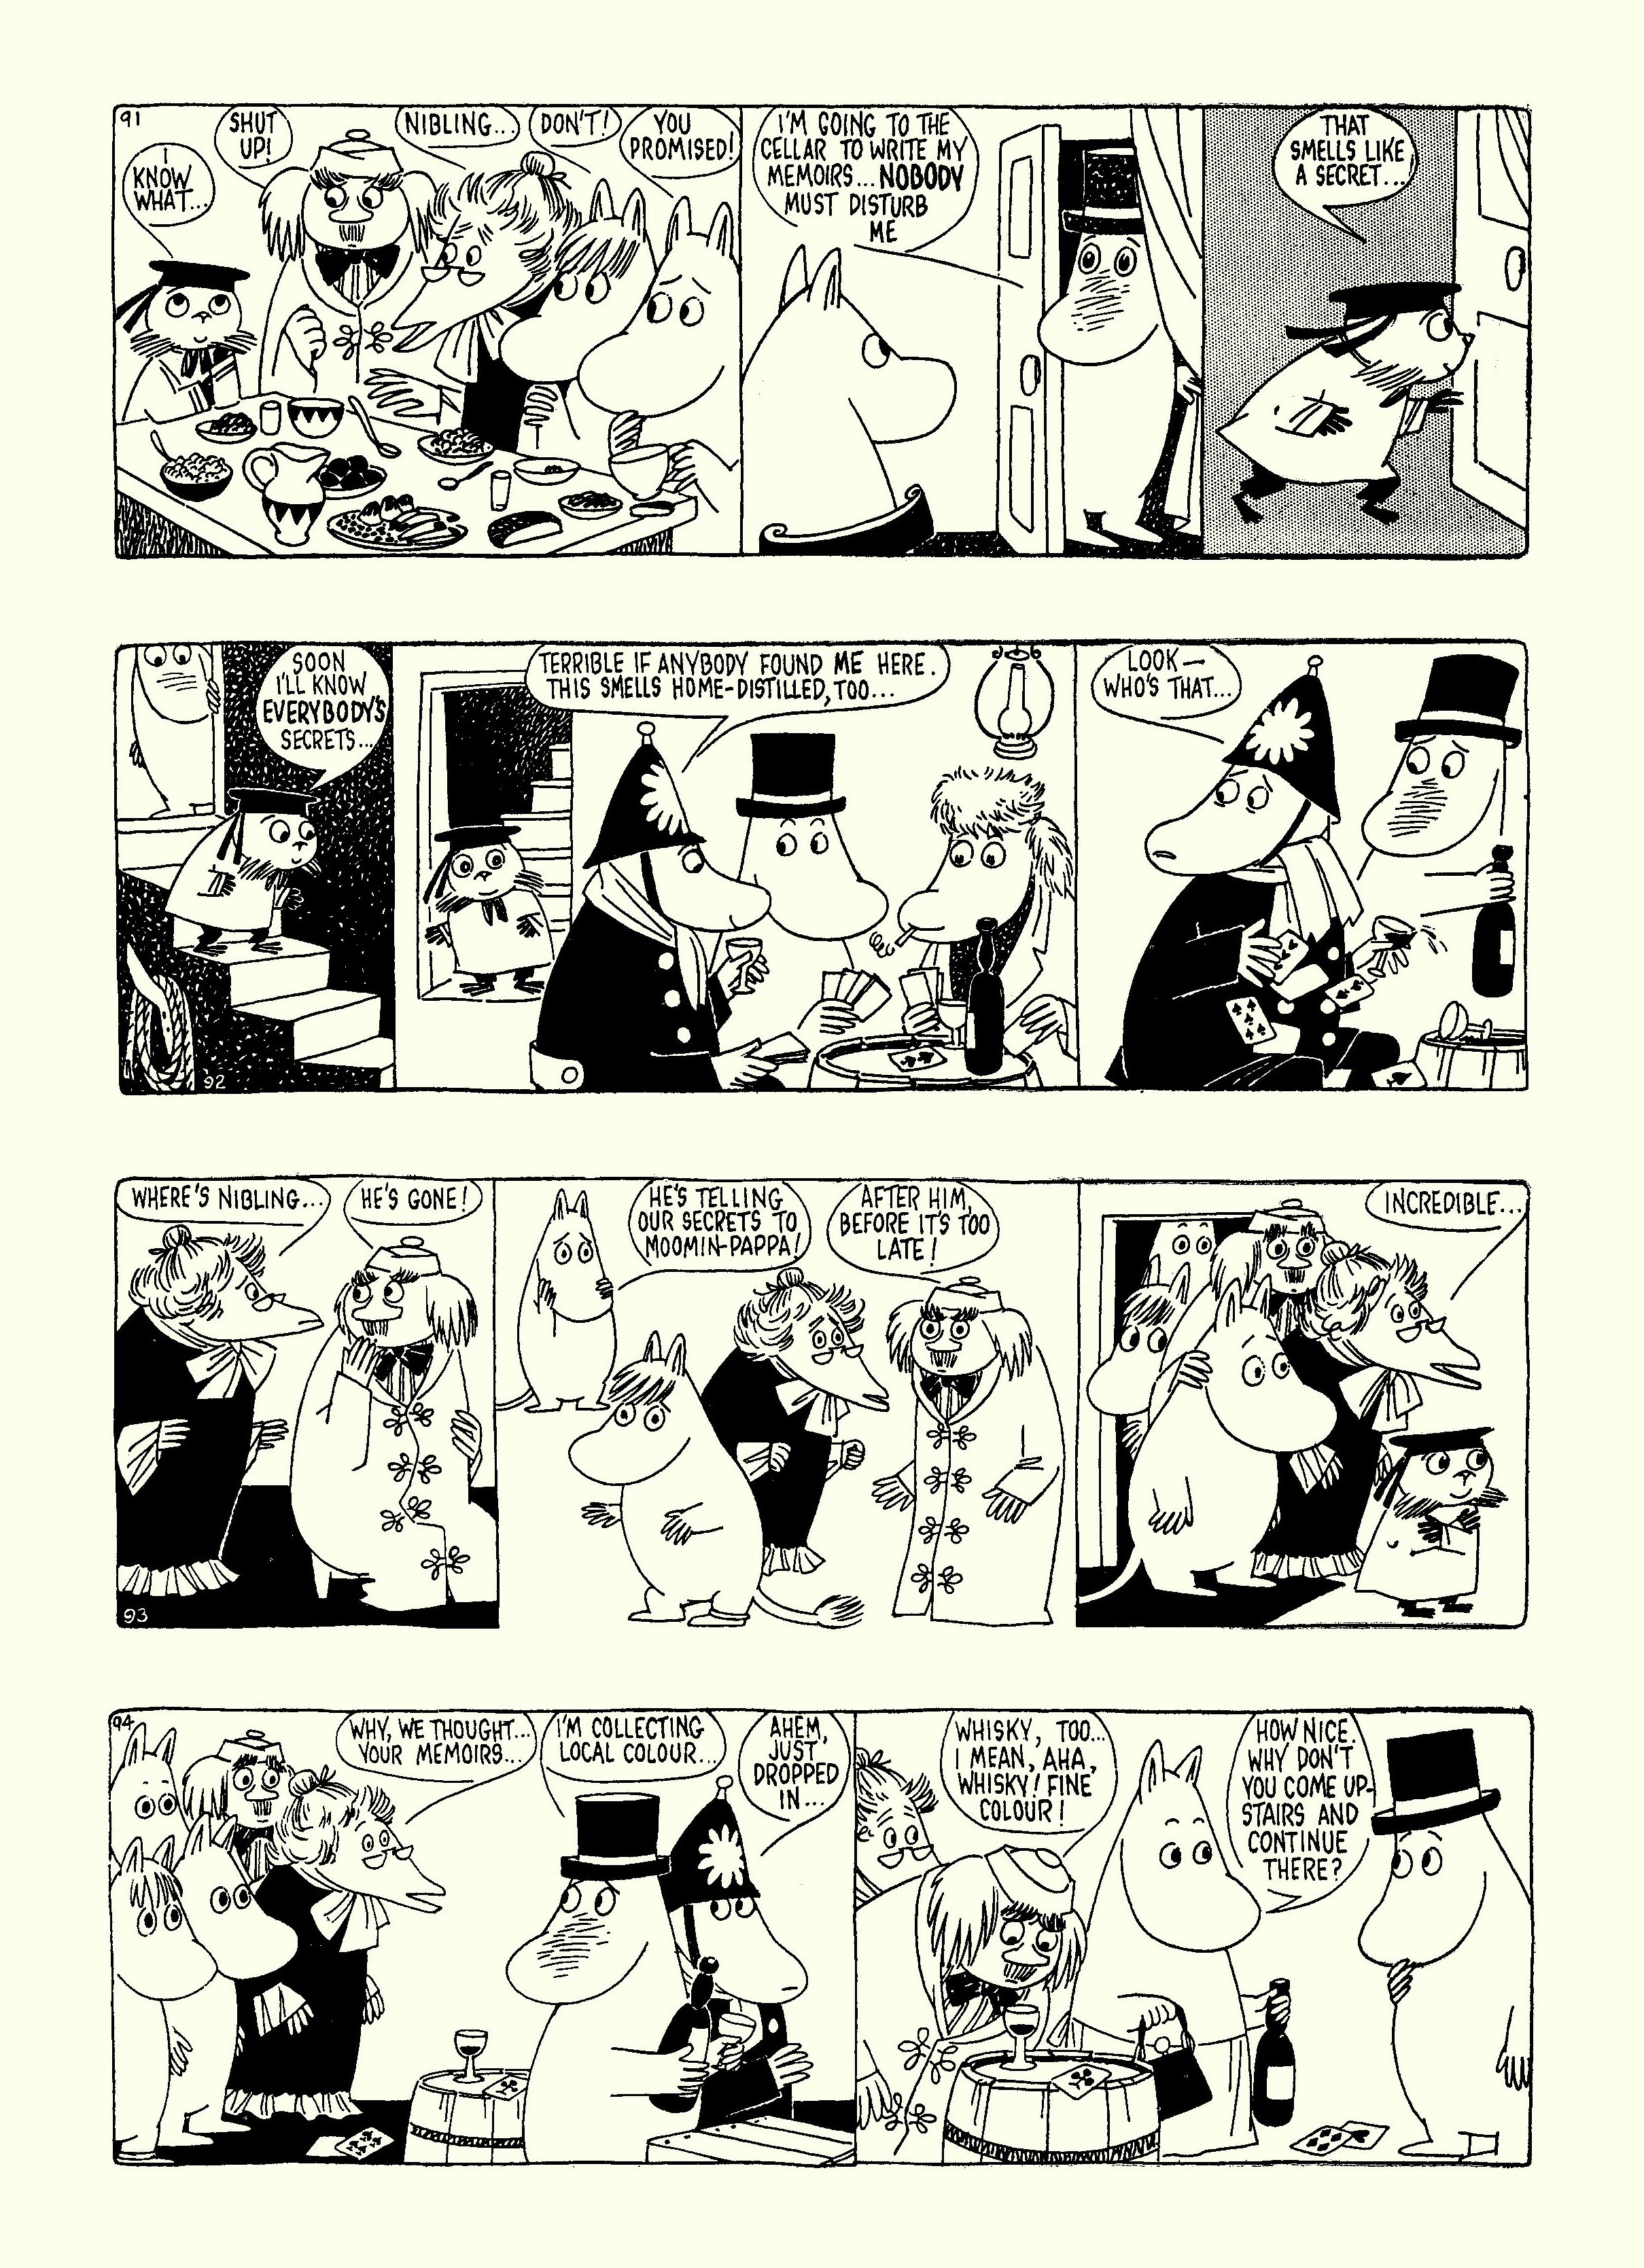 Read online Moomin: The Complete Tove Jansson Comic Strip comic -  Issue # TPB 5 - 29